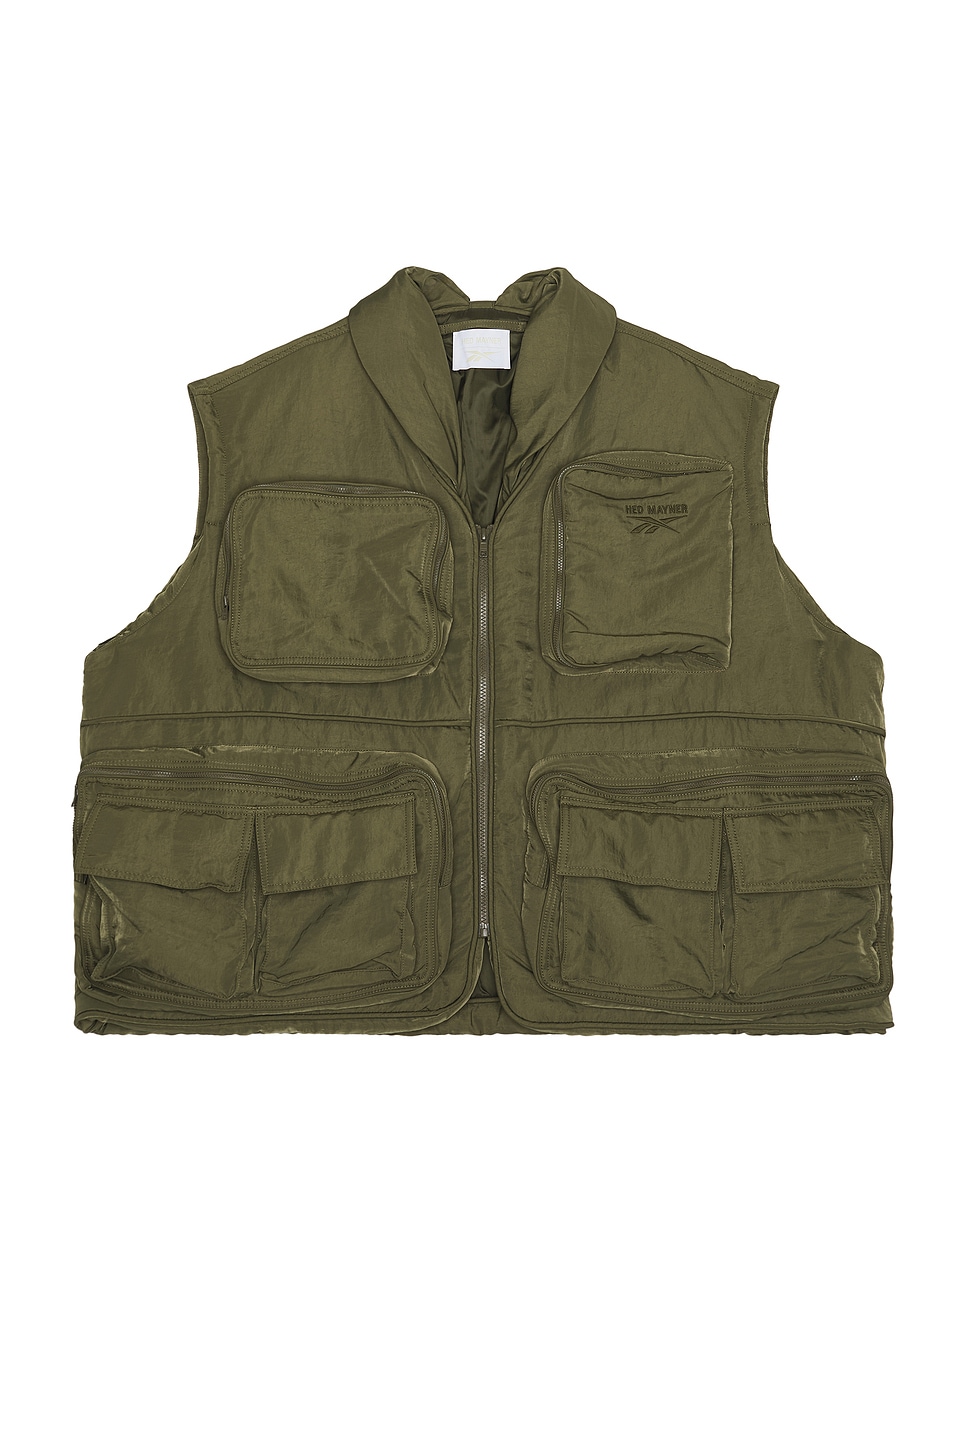 Image 1 of Reebok x Hed Mayner Pocketed Vest in Army Green